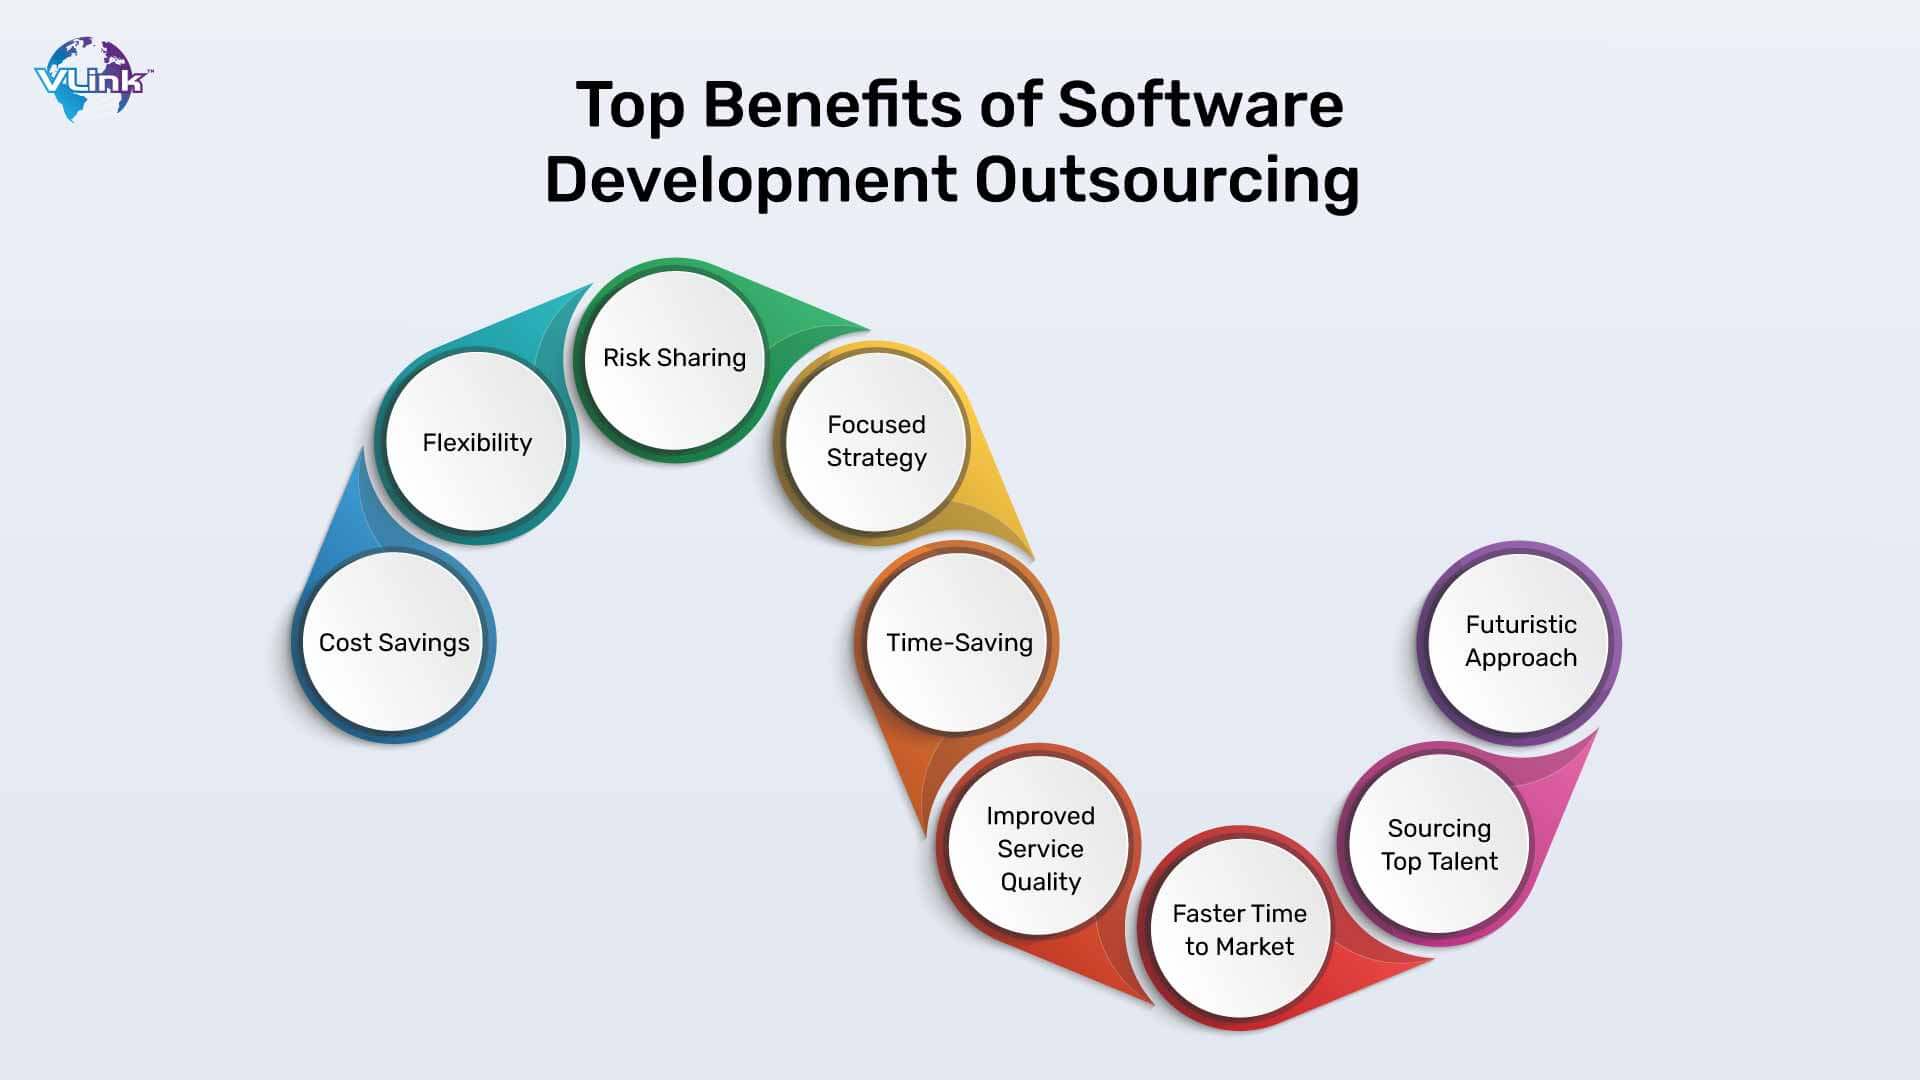 Top Benefits of Software Development Outsourcing